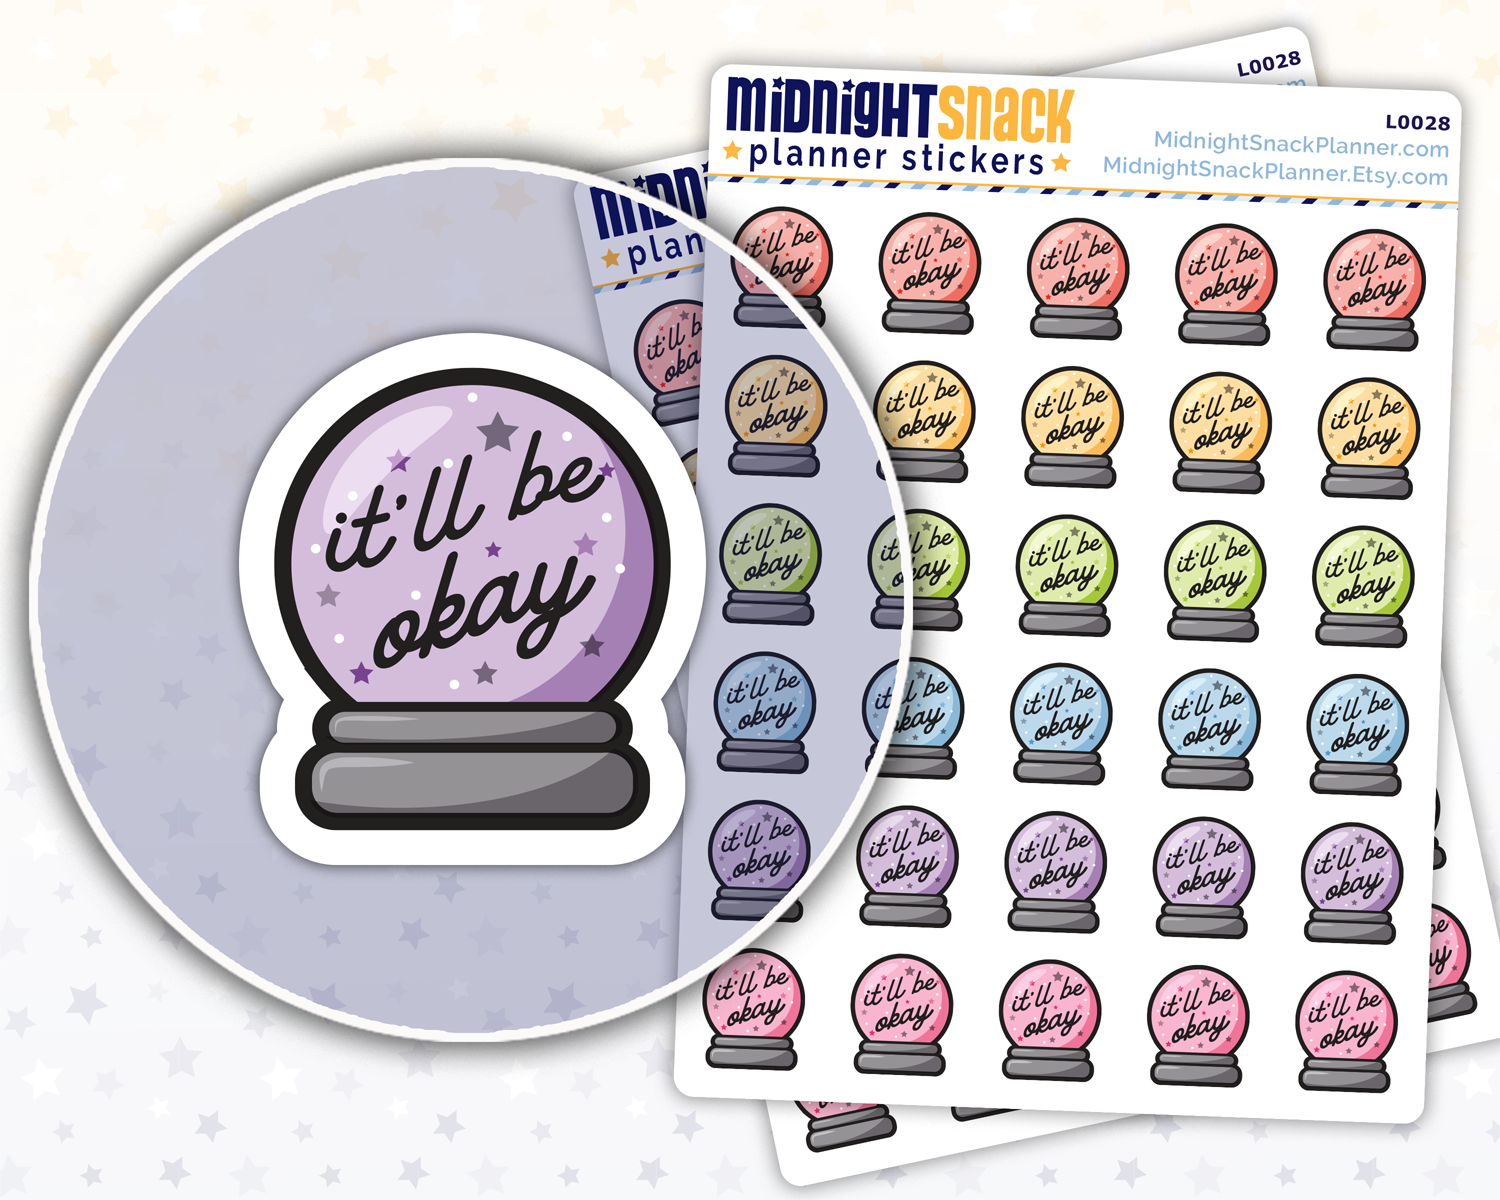 "It'll Be Okay" Crystal Ball Icon: Self Care Planner Stickers